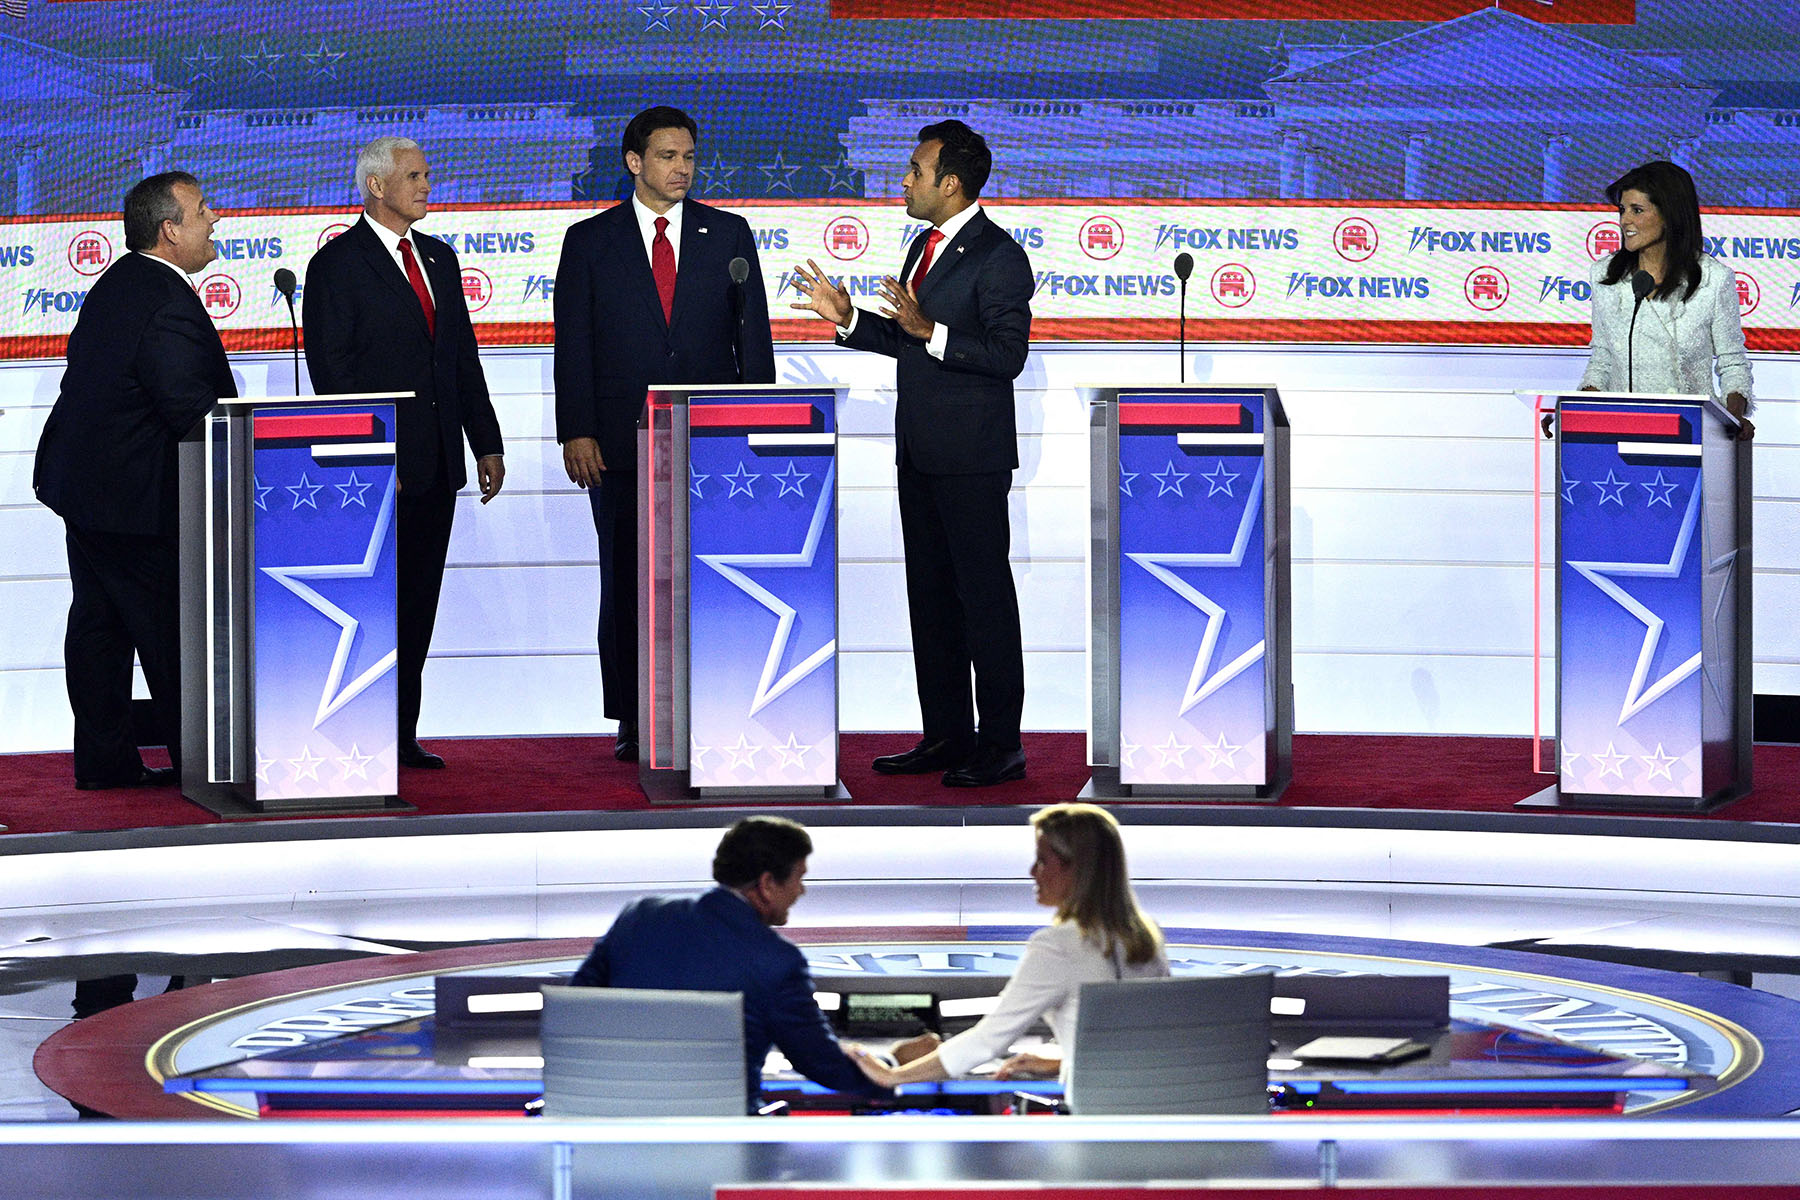 Nikki Haley looks on as Chris Christie, Mike Pence, Ron DeSantis and Vivek Ramaswamy speak on stage during a break in the first Republican Presidential primary debate.